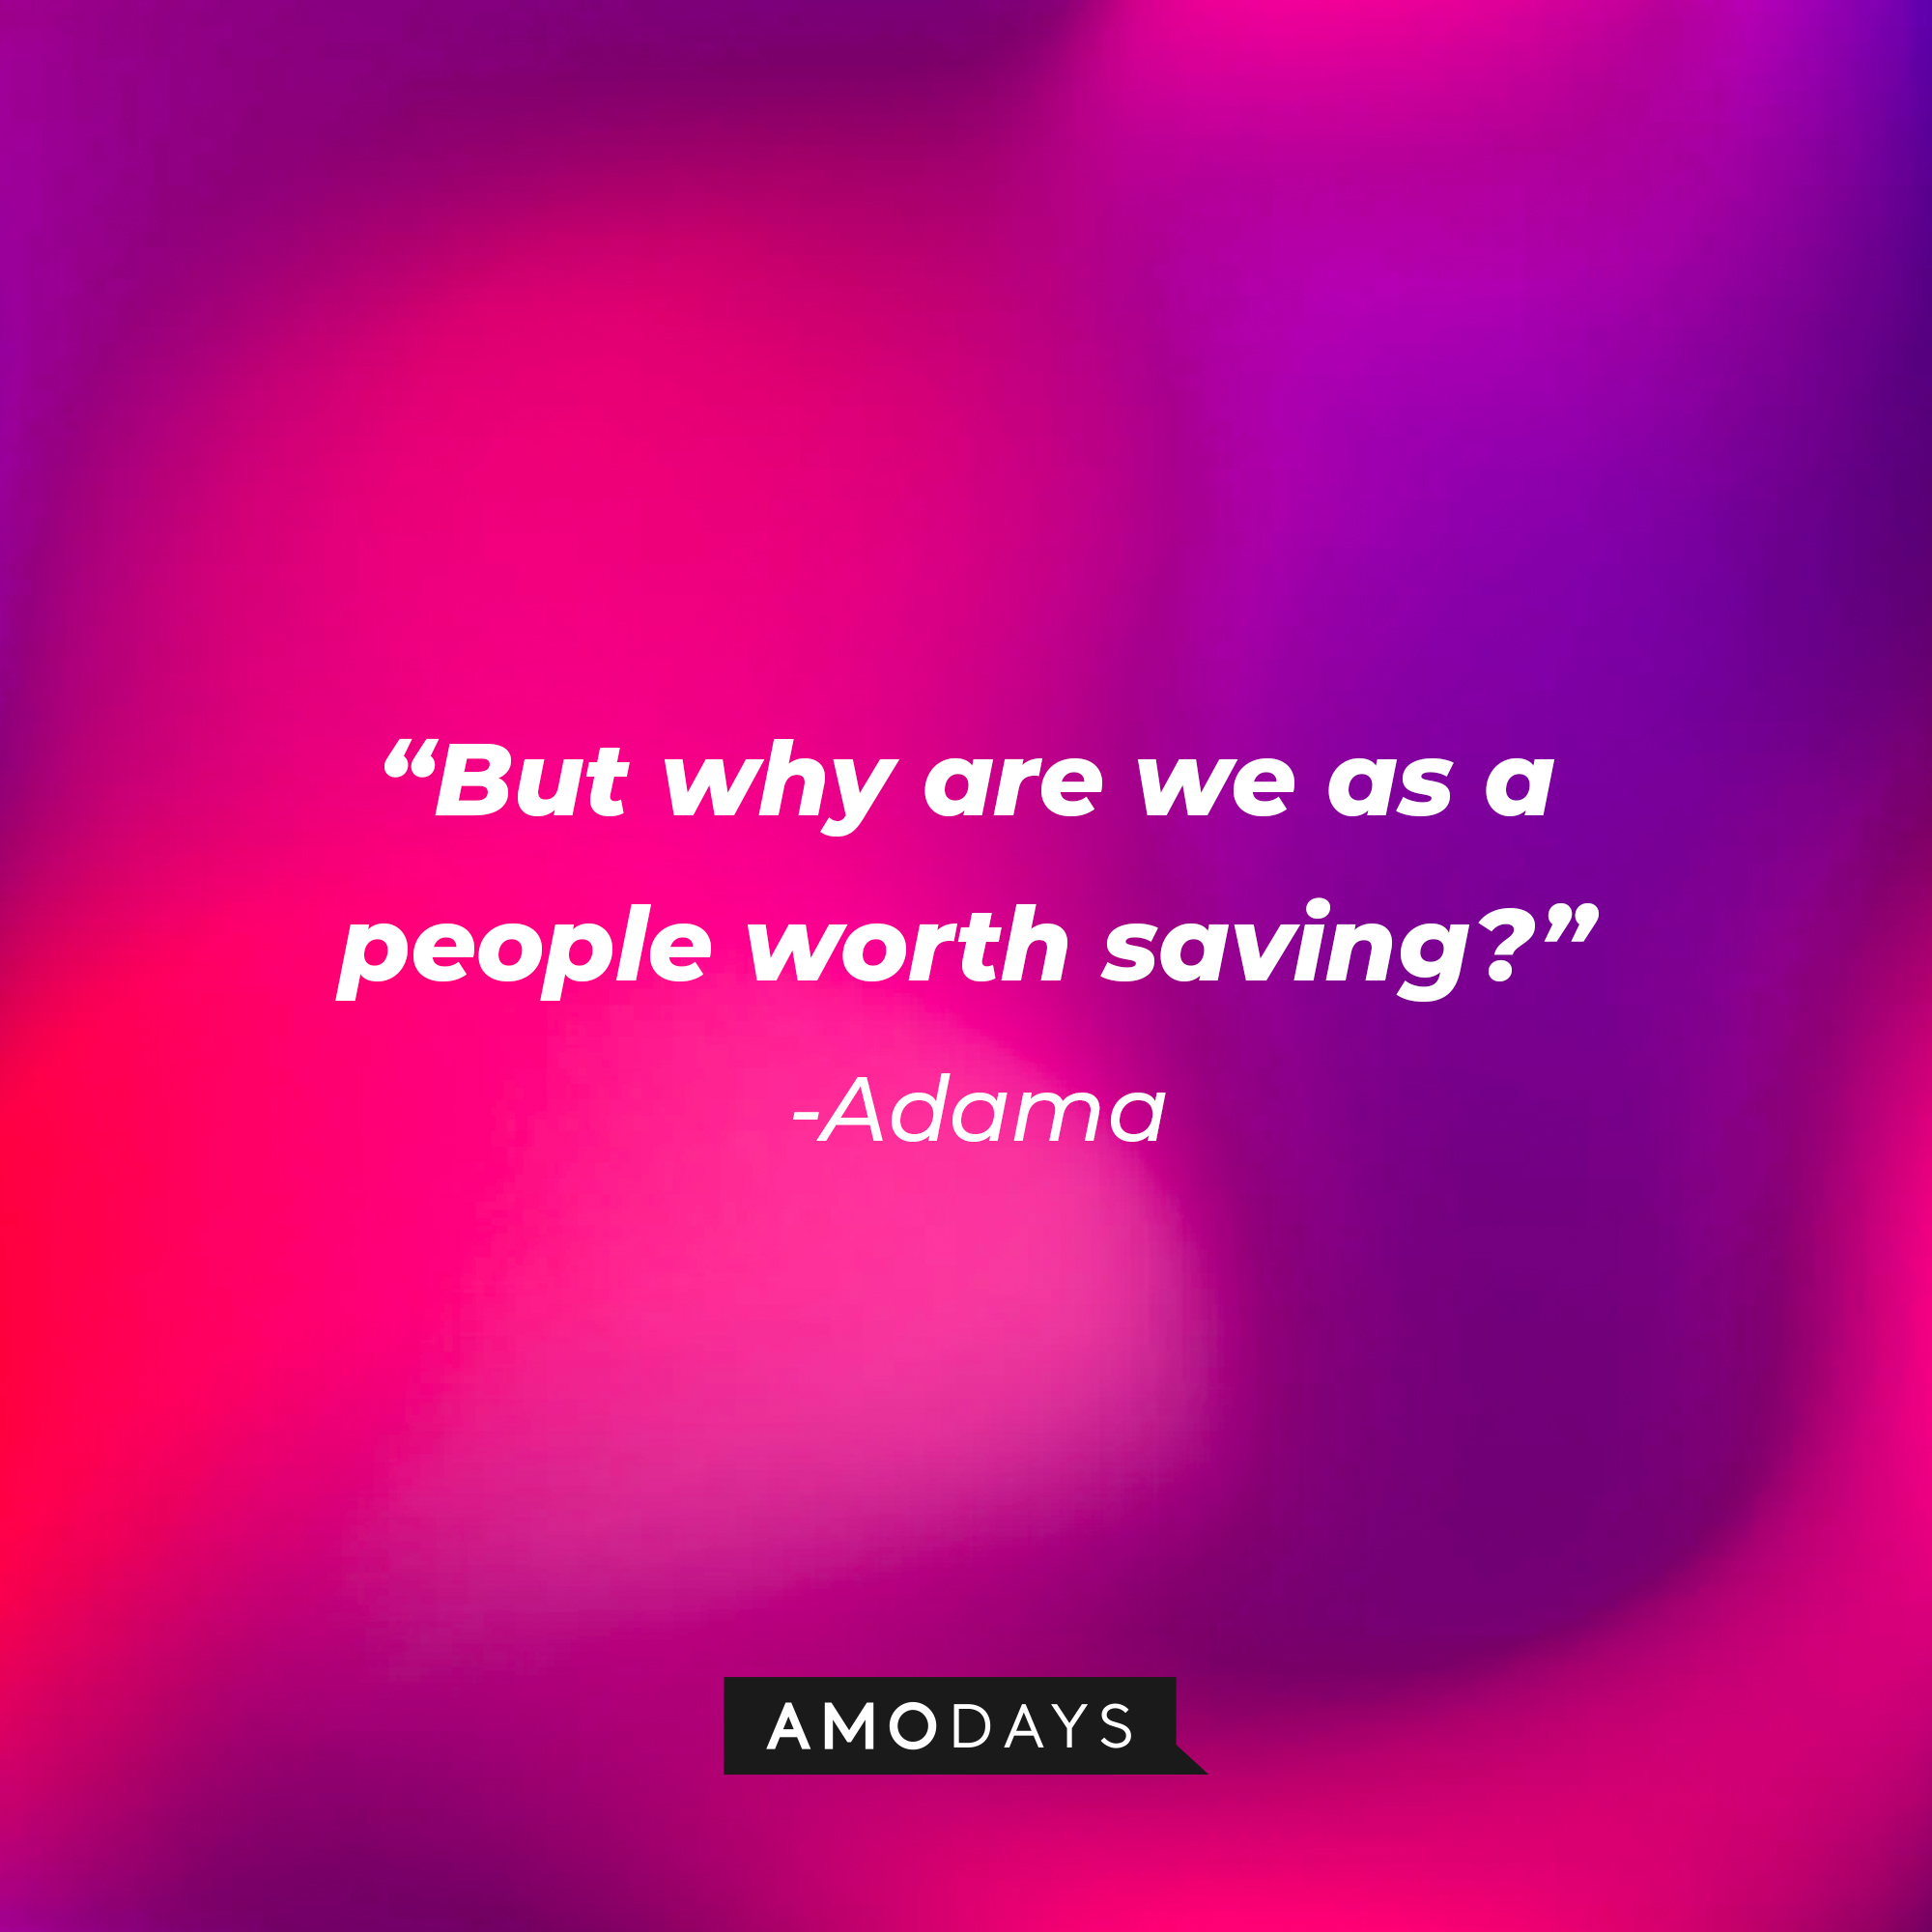 Adama’s quote: “But why are we as a people worth saving?” | Source: AmoDays